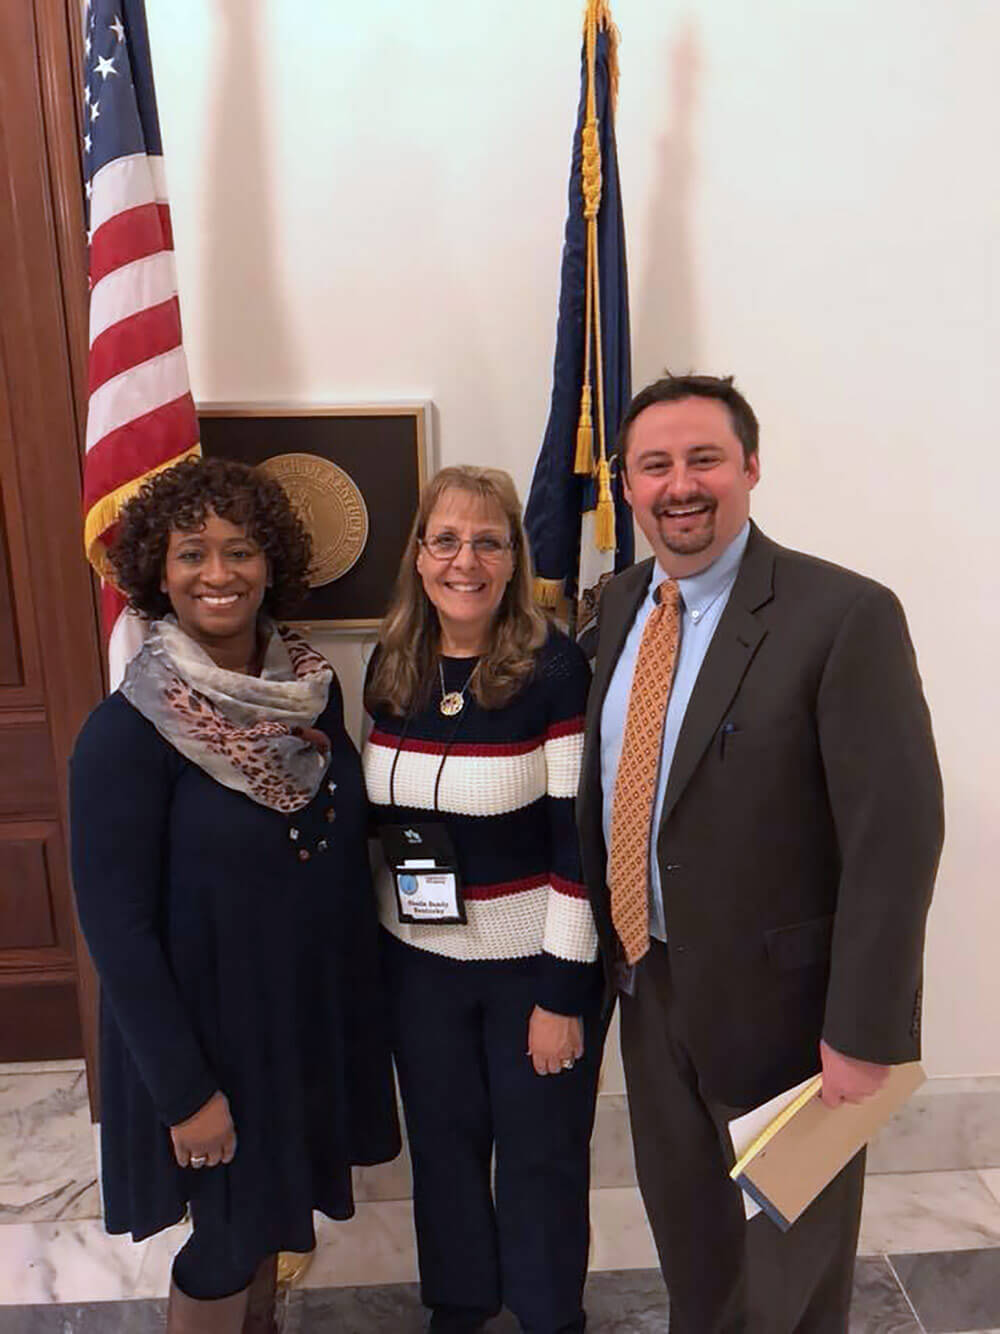 Shelia Brookins (left) and Shelia Bandy, working as representatives of the Enlisted Association of the National Guard of Kentucky (EANGKY), visit with Brett King, a military legislative assistant in the Office of Sen. Rand Paul and other Kentucky congressional representatives to discuss initiatives supporting Kentucky State military affairs, Feb. 9, 2018. Photo courtesy Enlisted Association of the National Guard of Kentucky